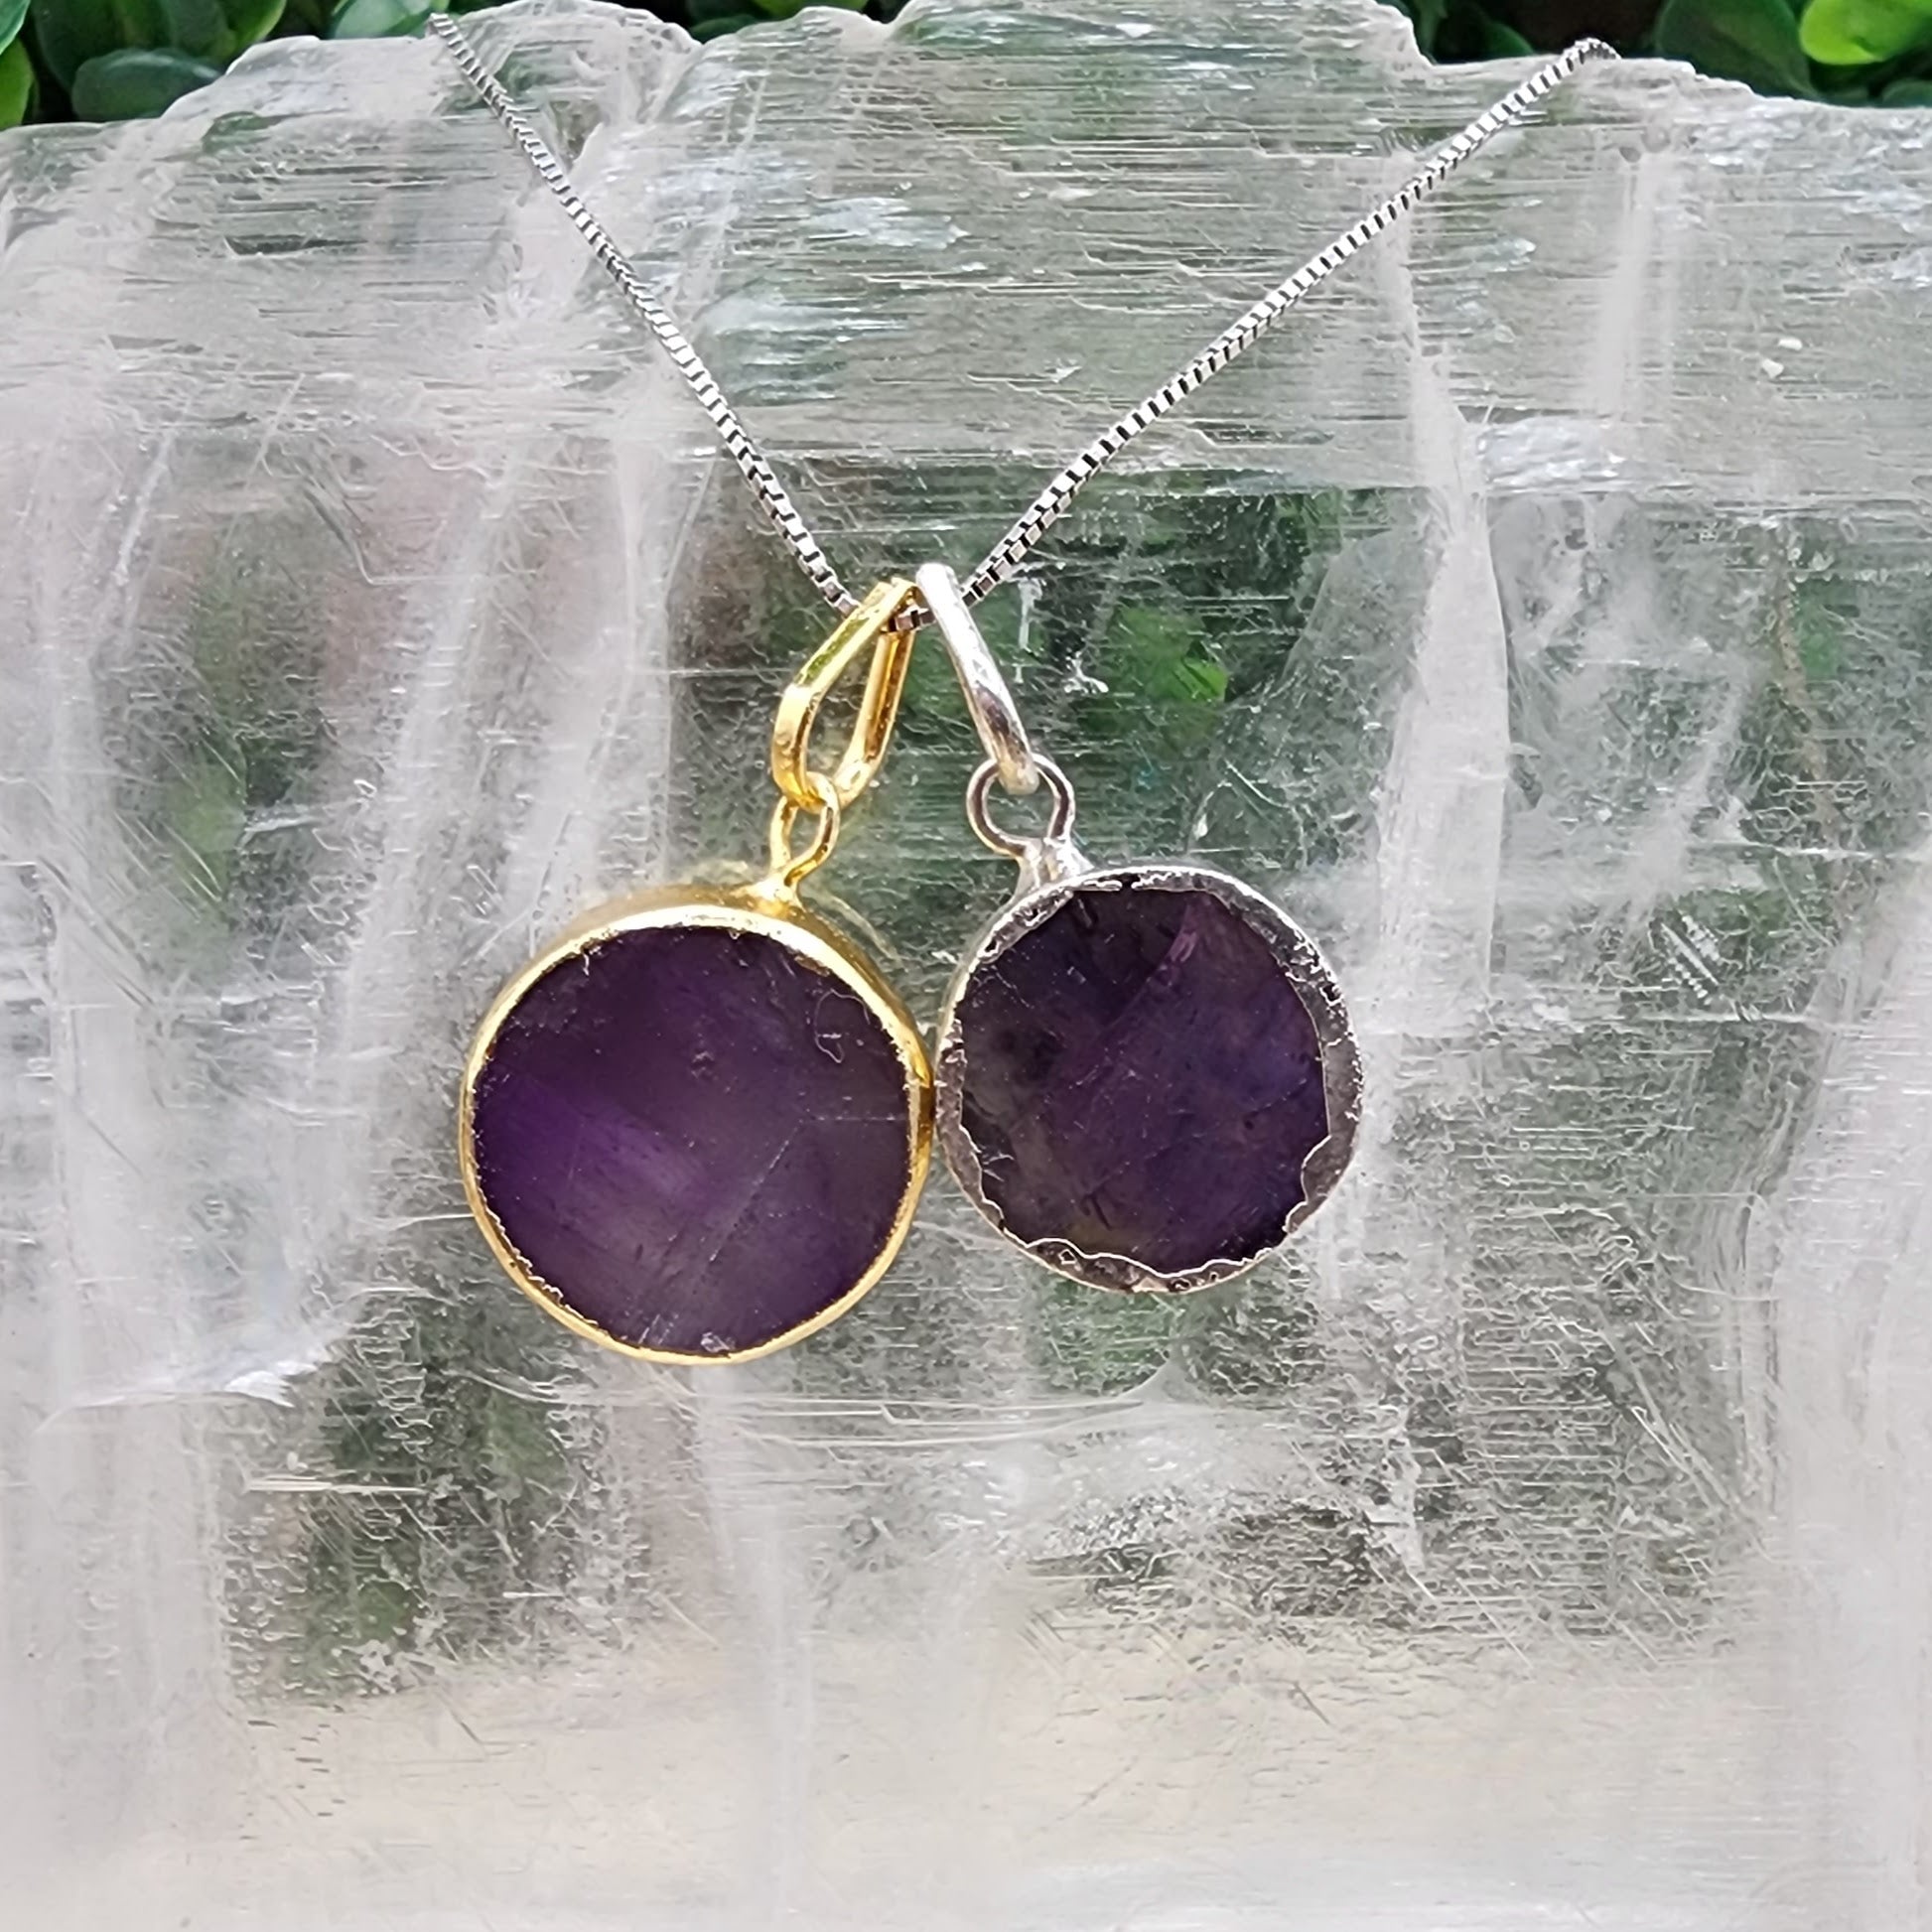 Full Moon In Amethyst Pendant (Silver or Gold Electroplating)